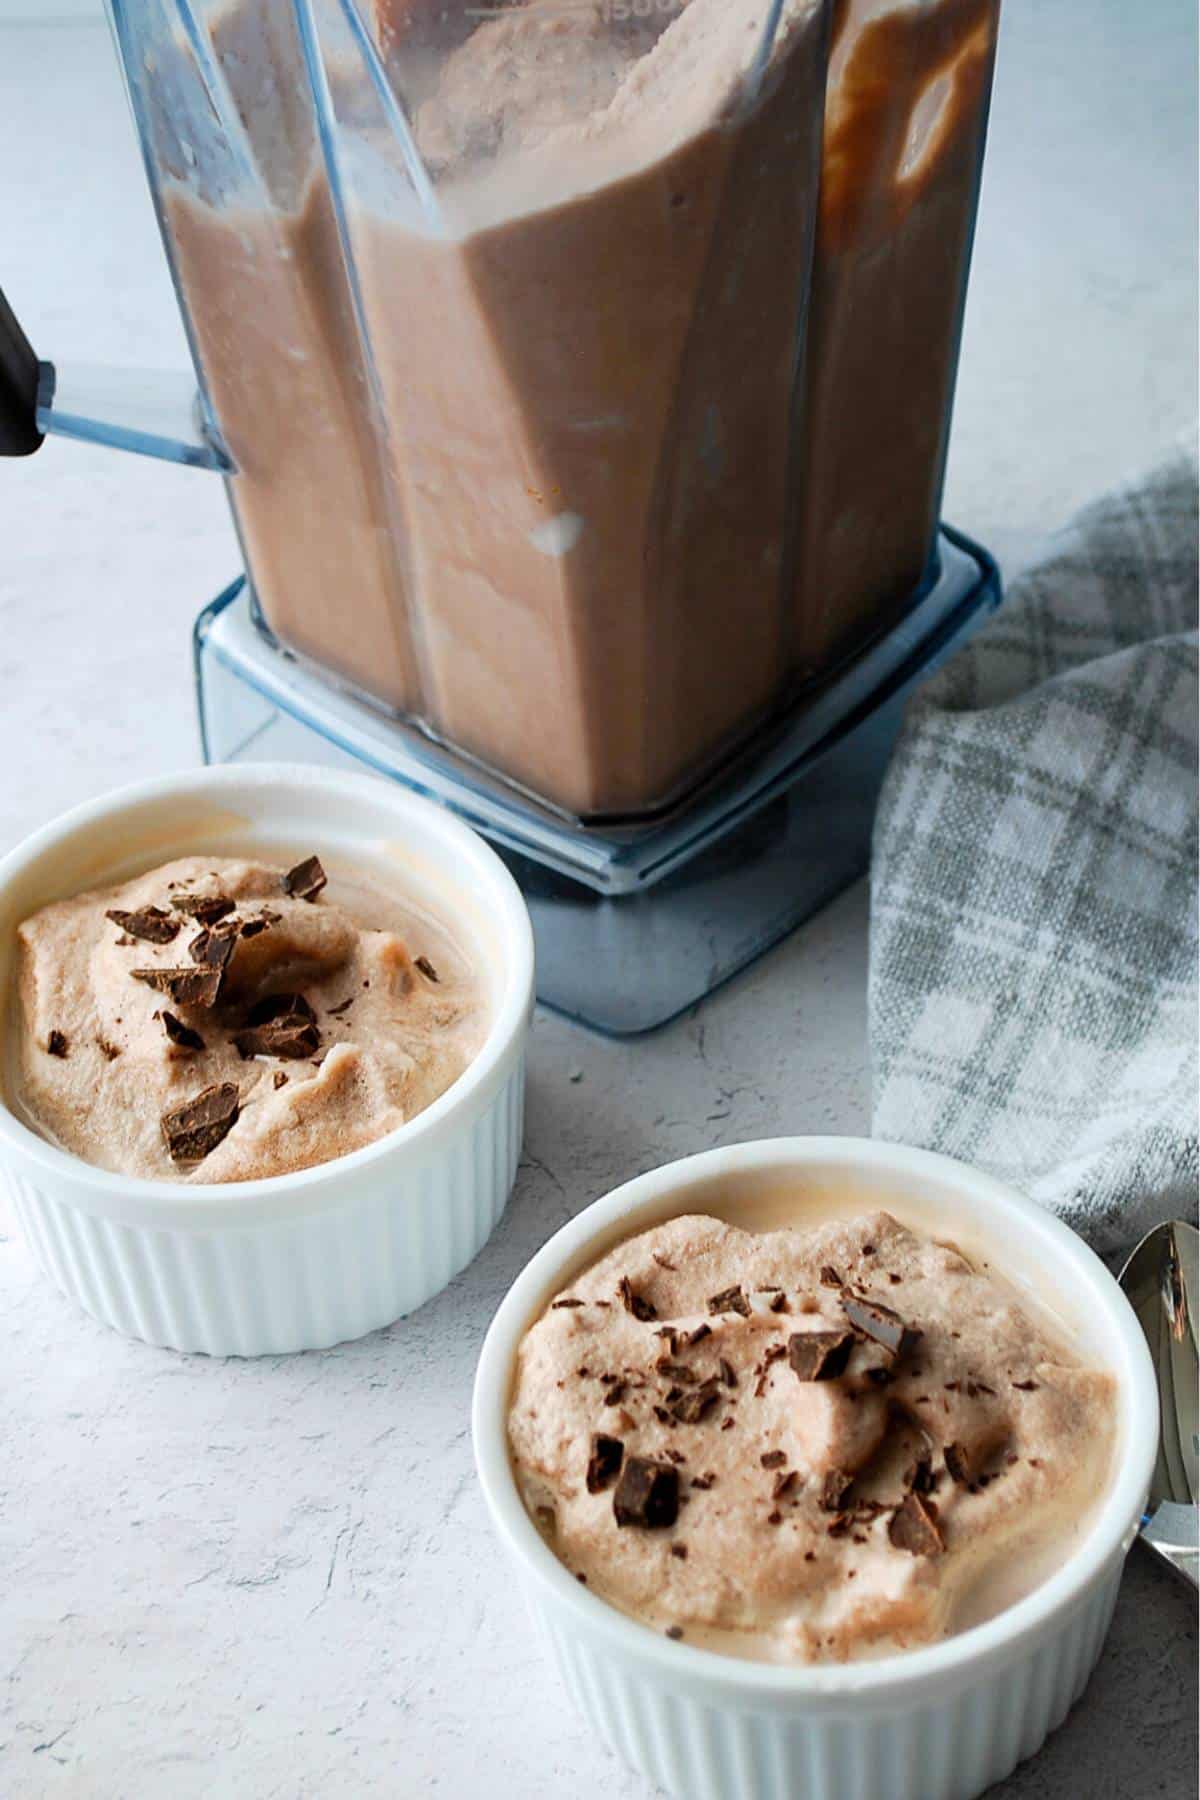 a Vitamix blender jar with chocolate ice cream in it and two small dishes of ice cream next to it